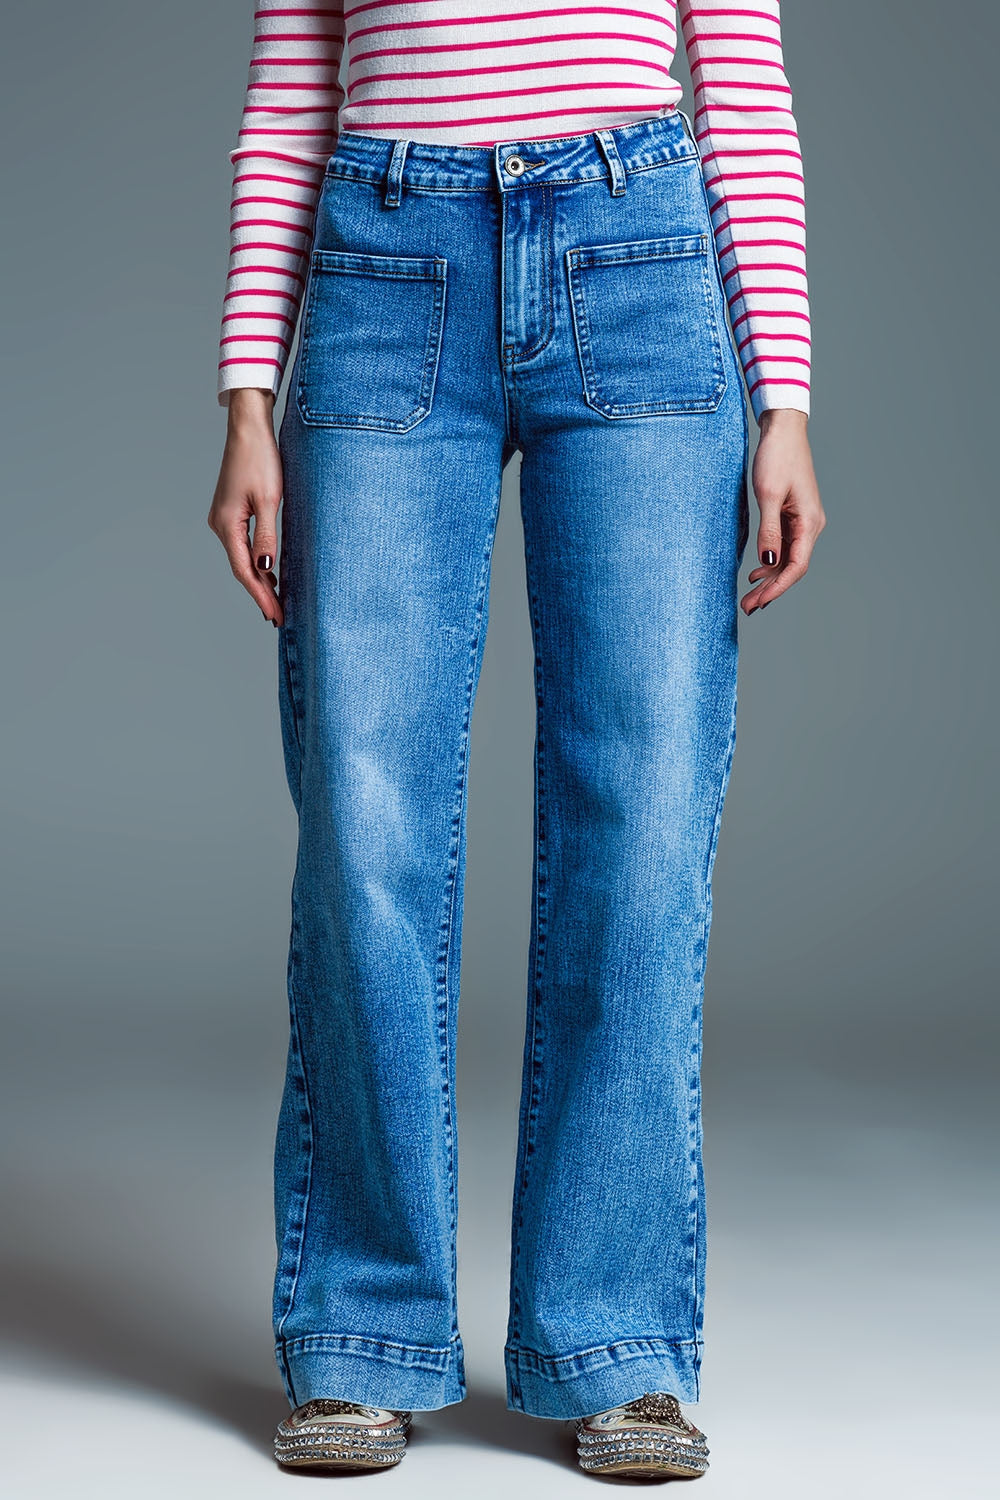 Q2 Low Waisted Jeans With Wide Leg And Marine Style Front Pockets in Mid Wash